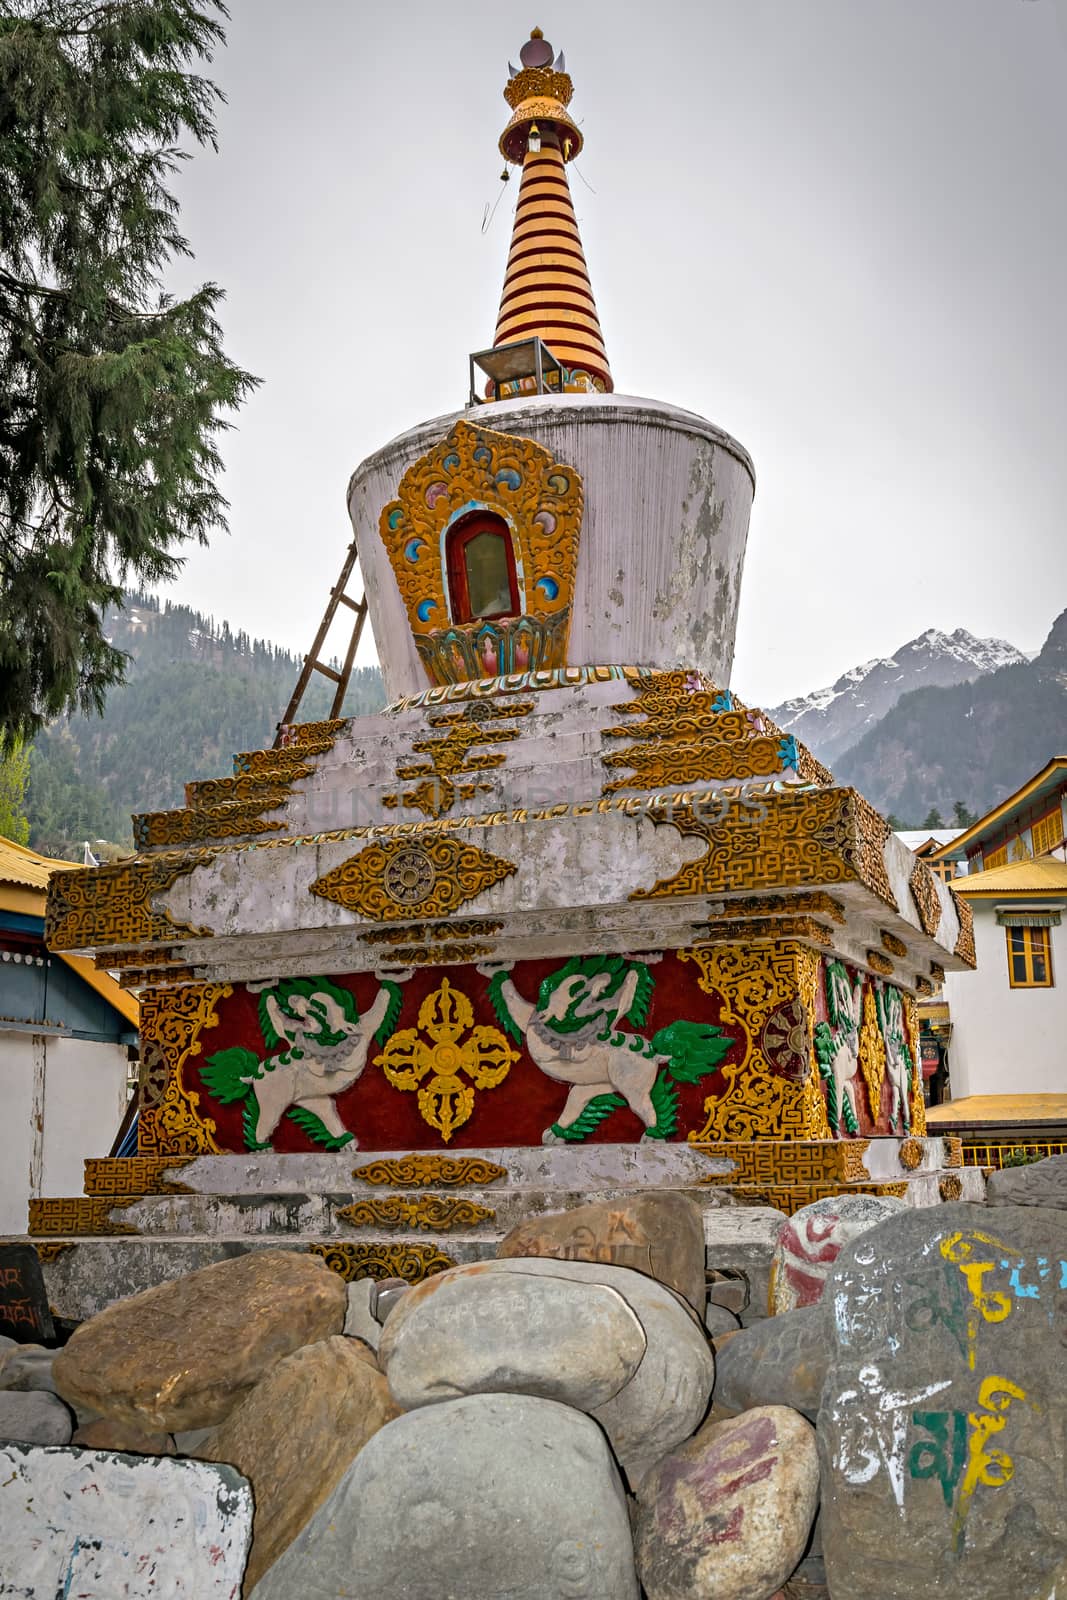 Nicely hand painted colorful Budhdhist Pagoda in Manali, Himachal Pradesh, India.